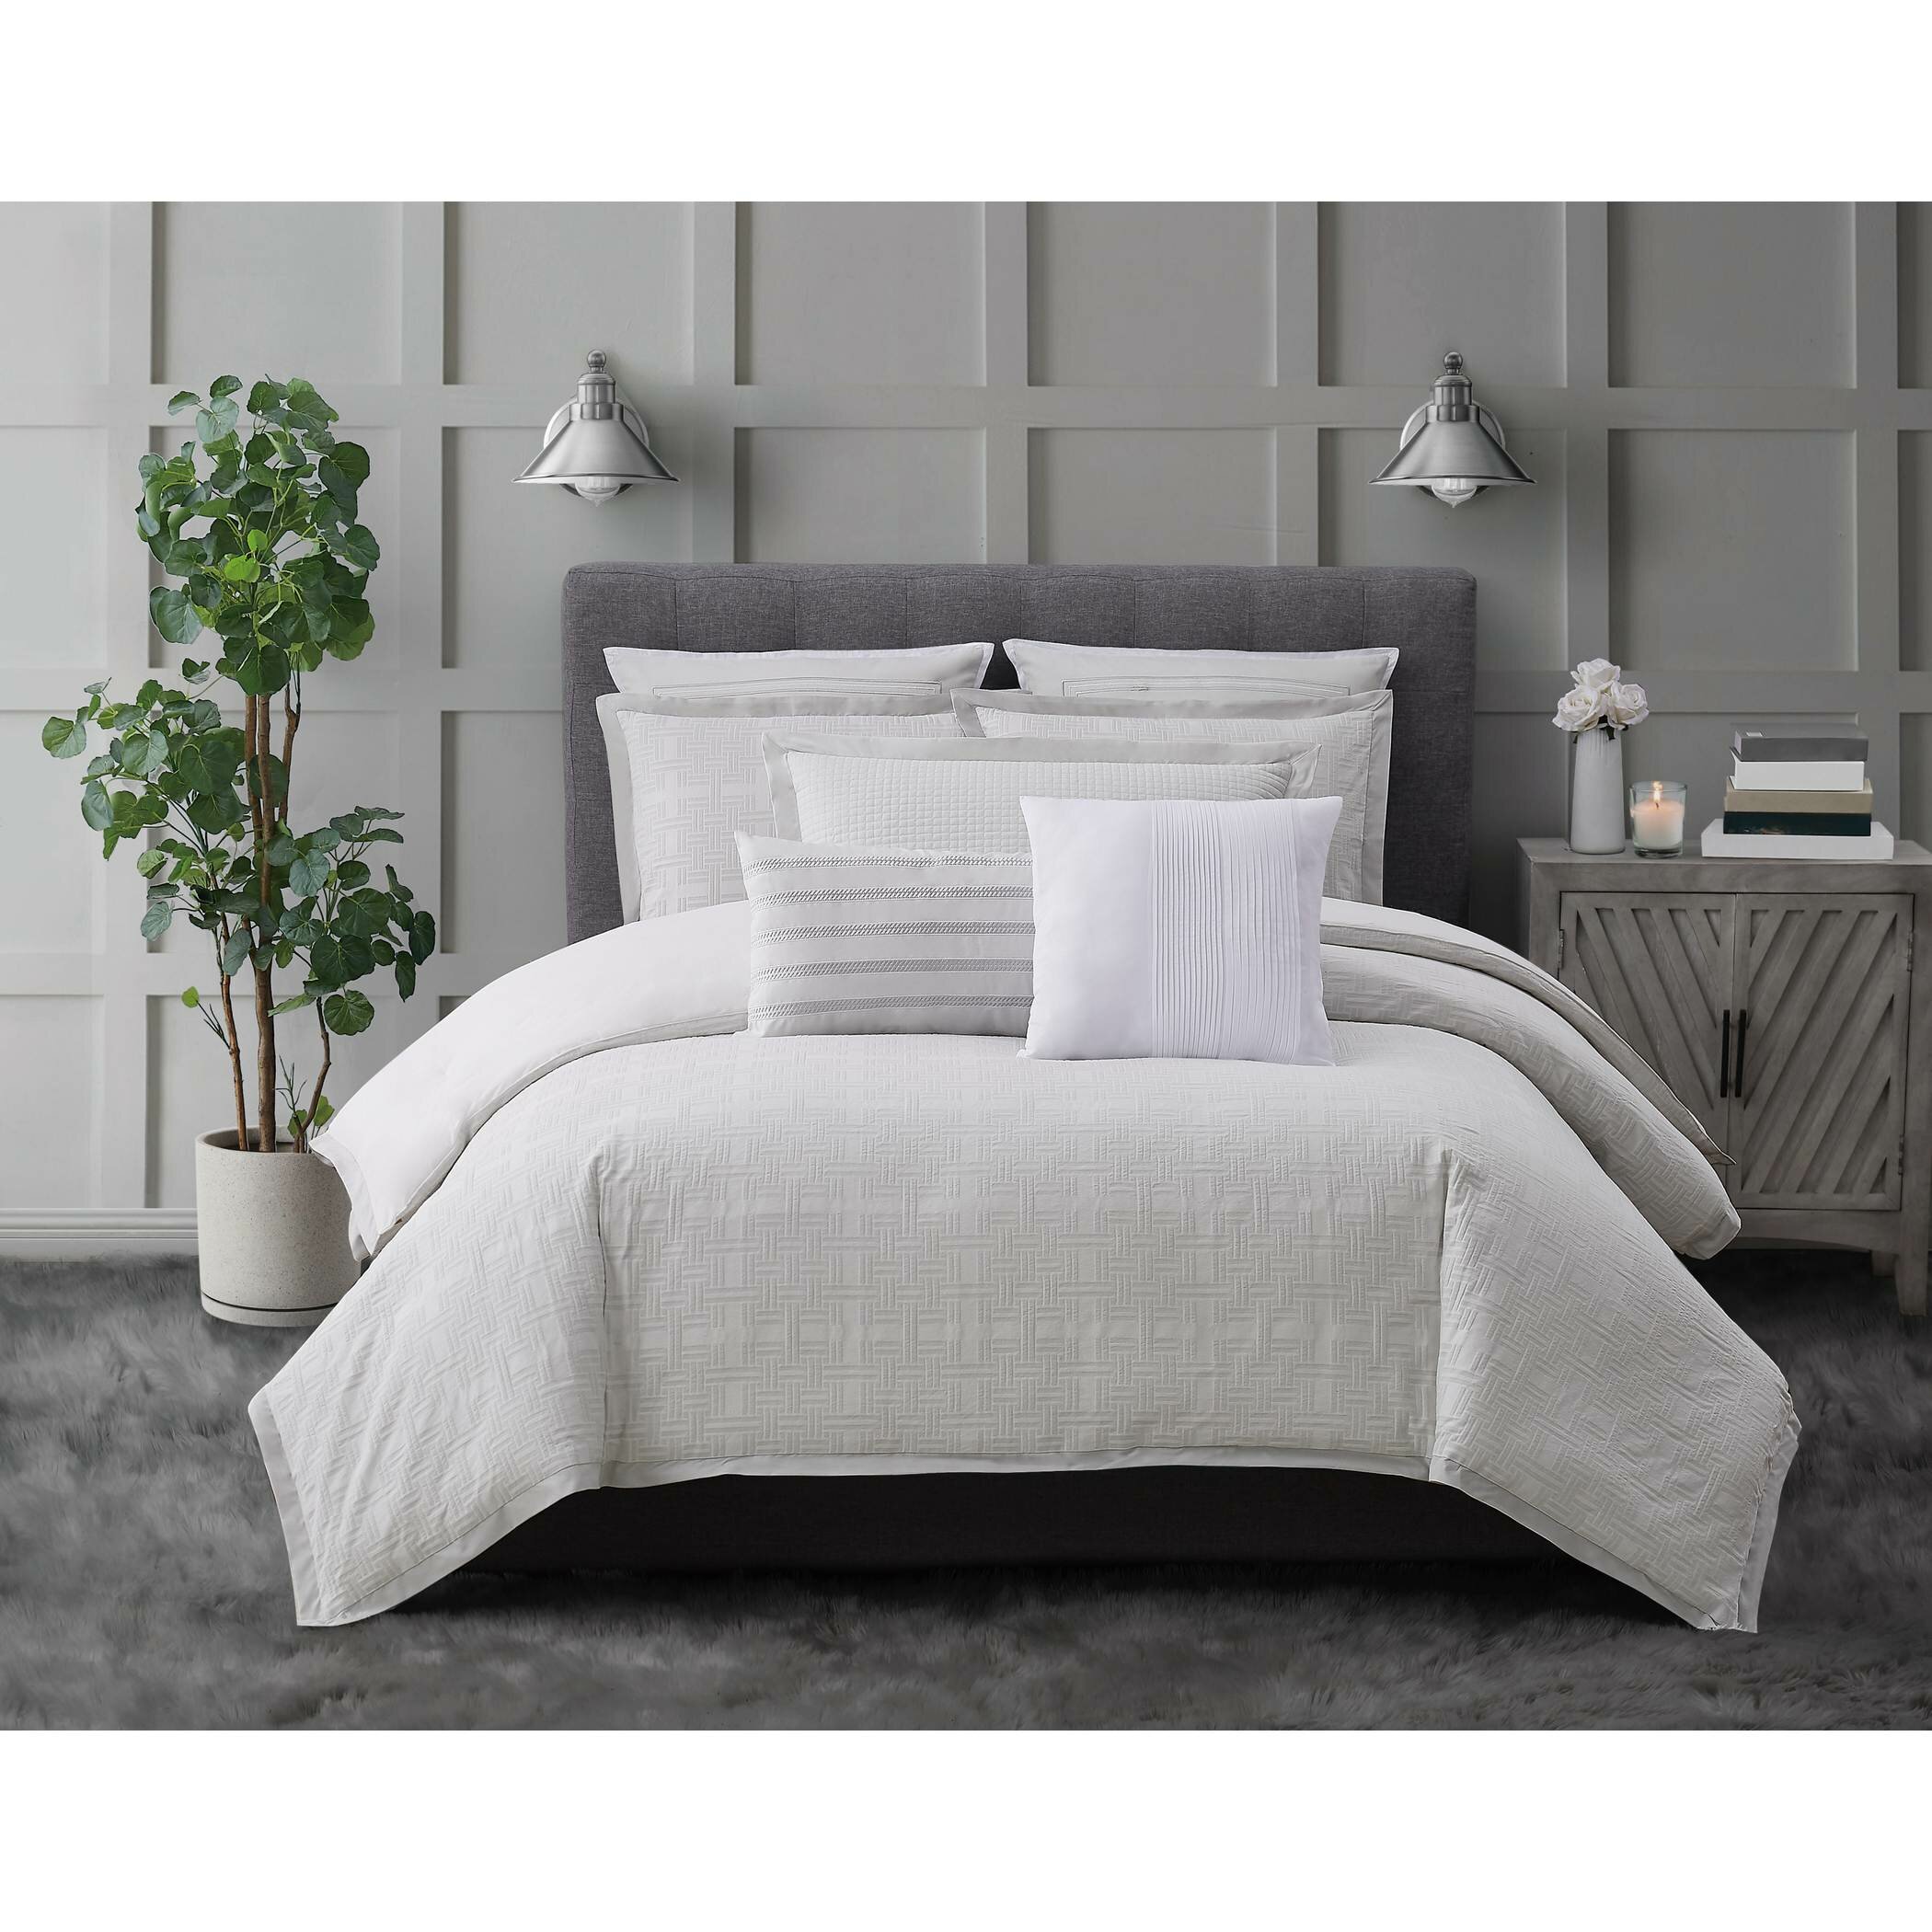 Machine Washable Besfor White Hotel Collection Luxury Down Alternative Quilted Comforter All Season -Plush Microfiber Fill White, Cal King